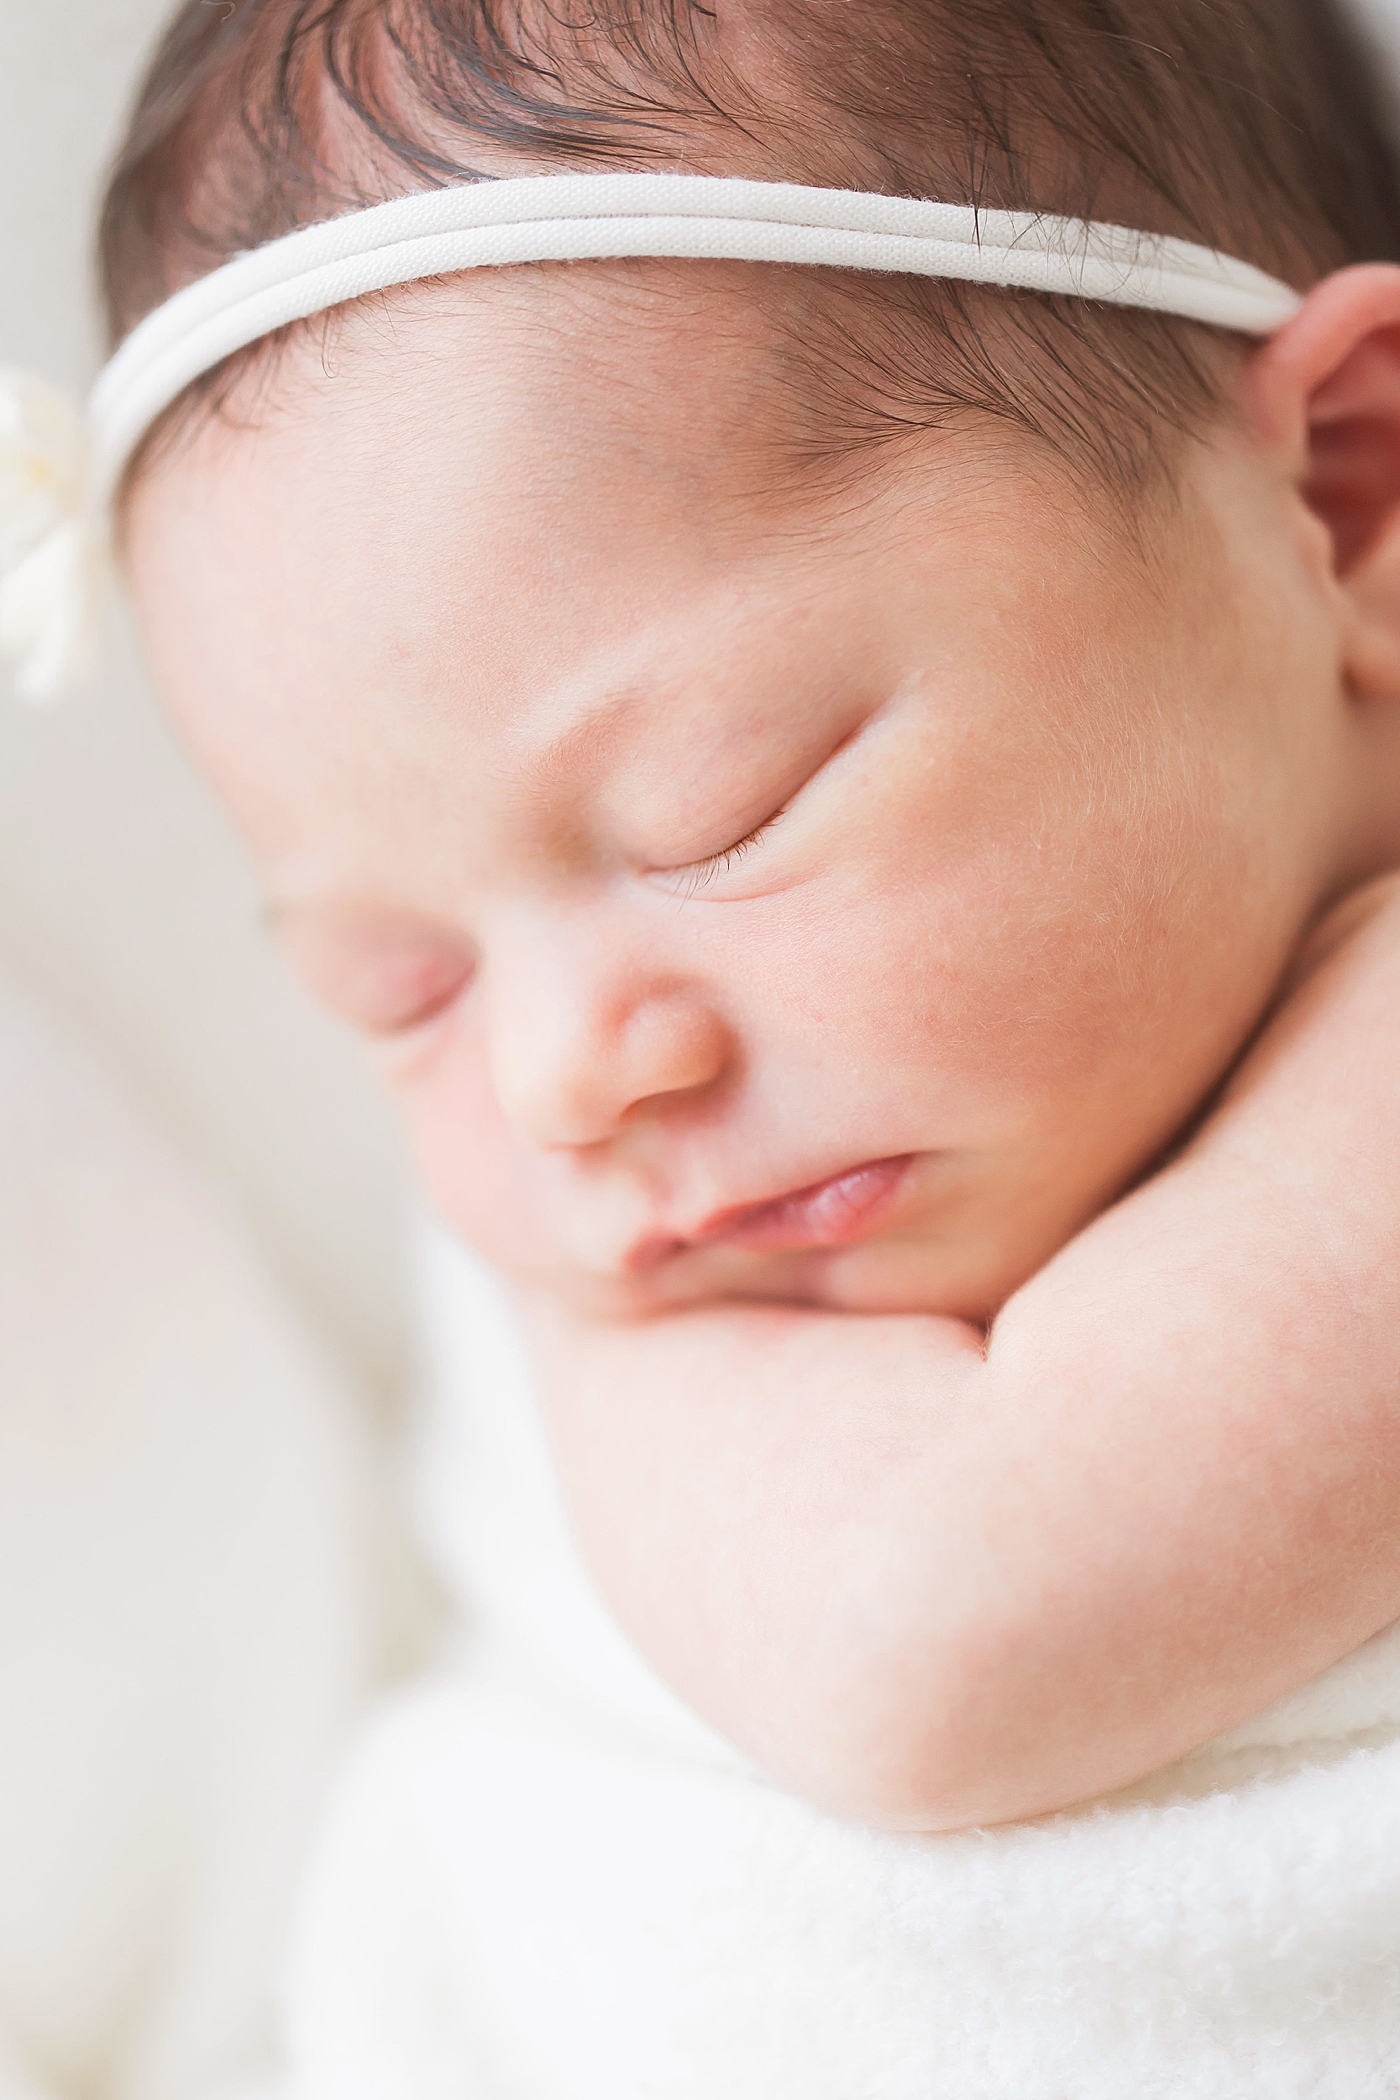 Baby girl curled up on her arm for newborn photos with Fresh Light Photography.